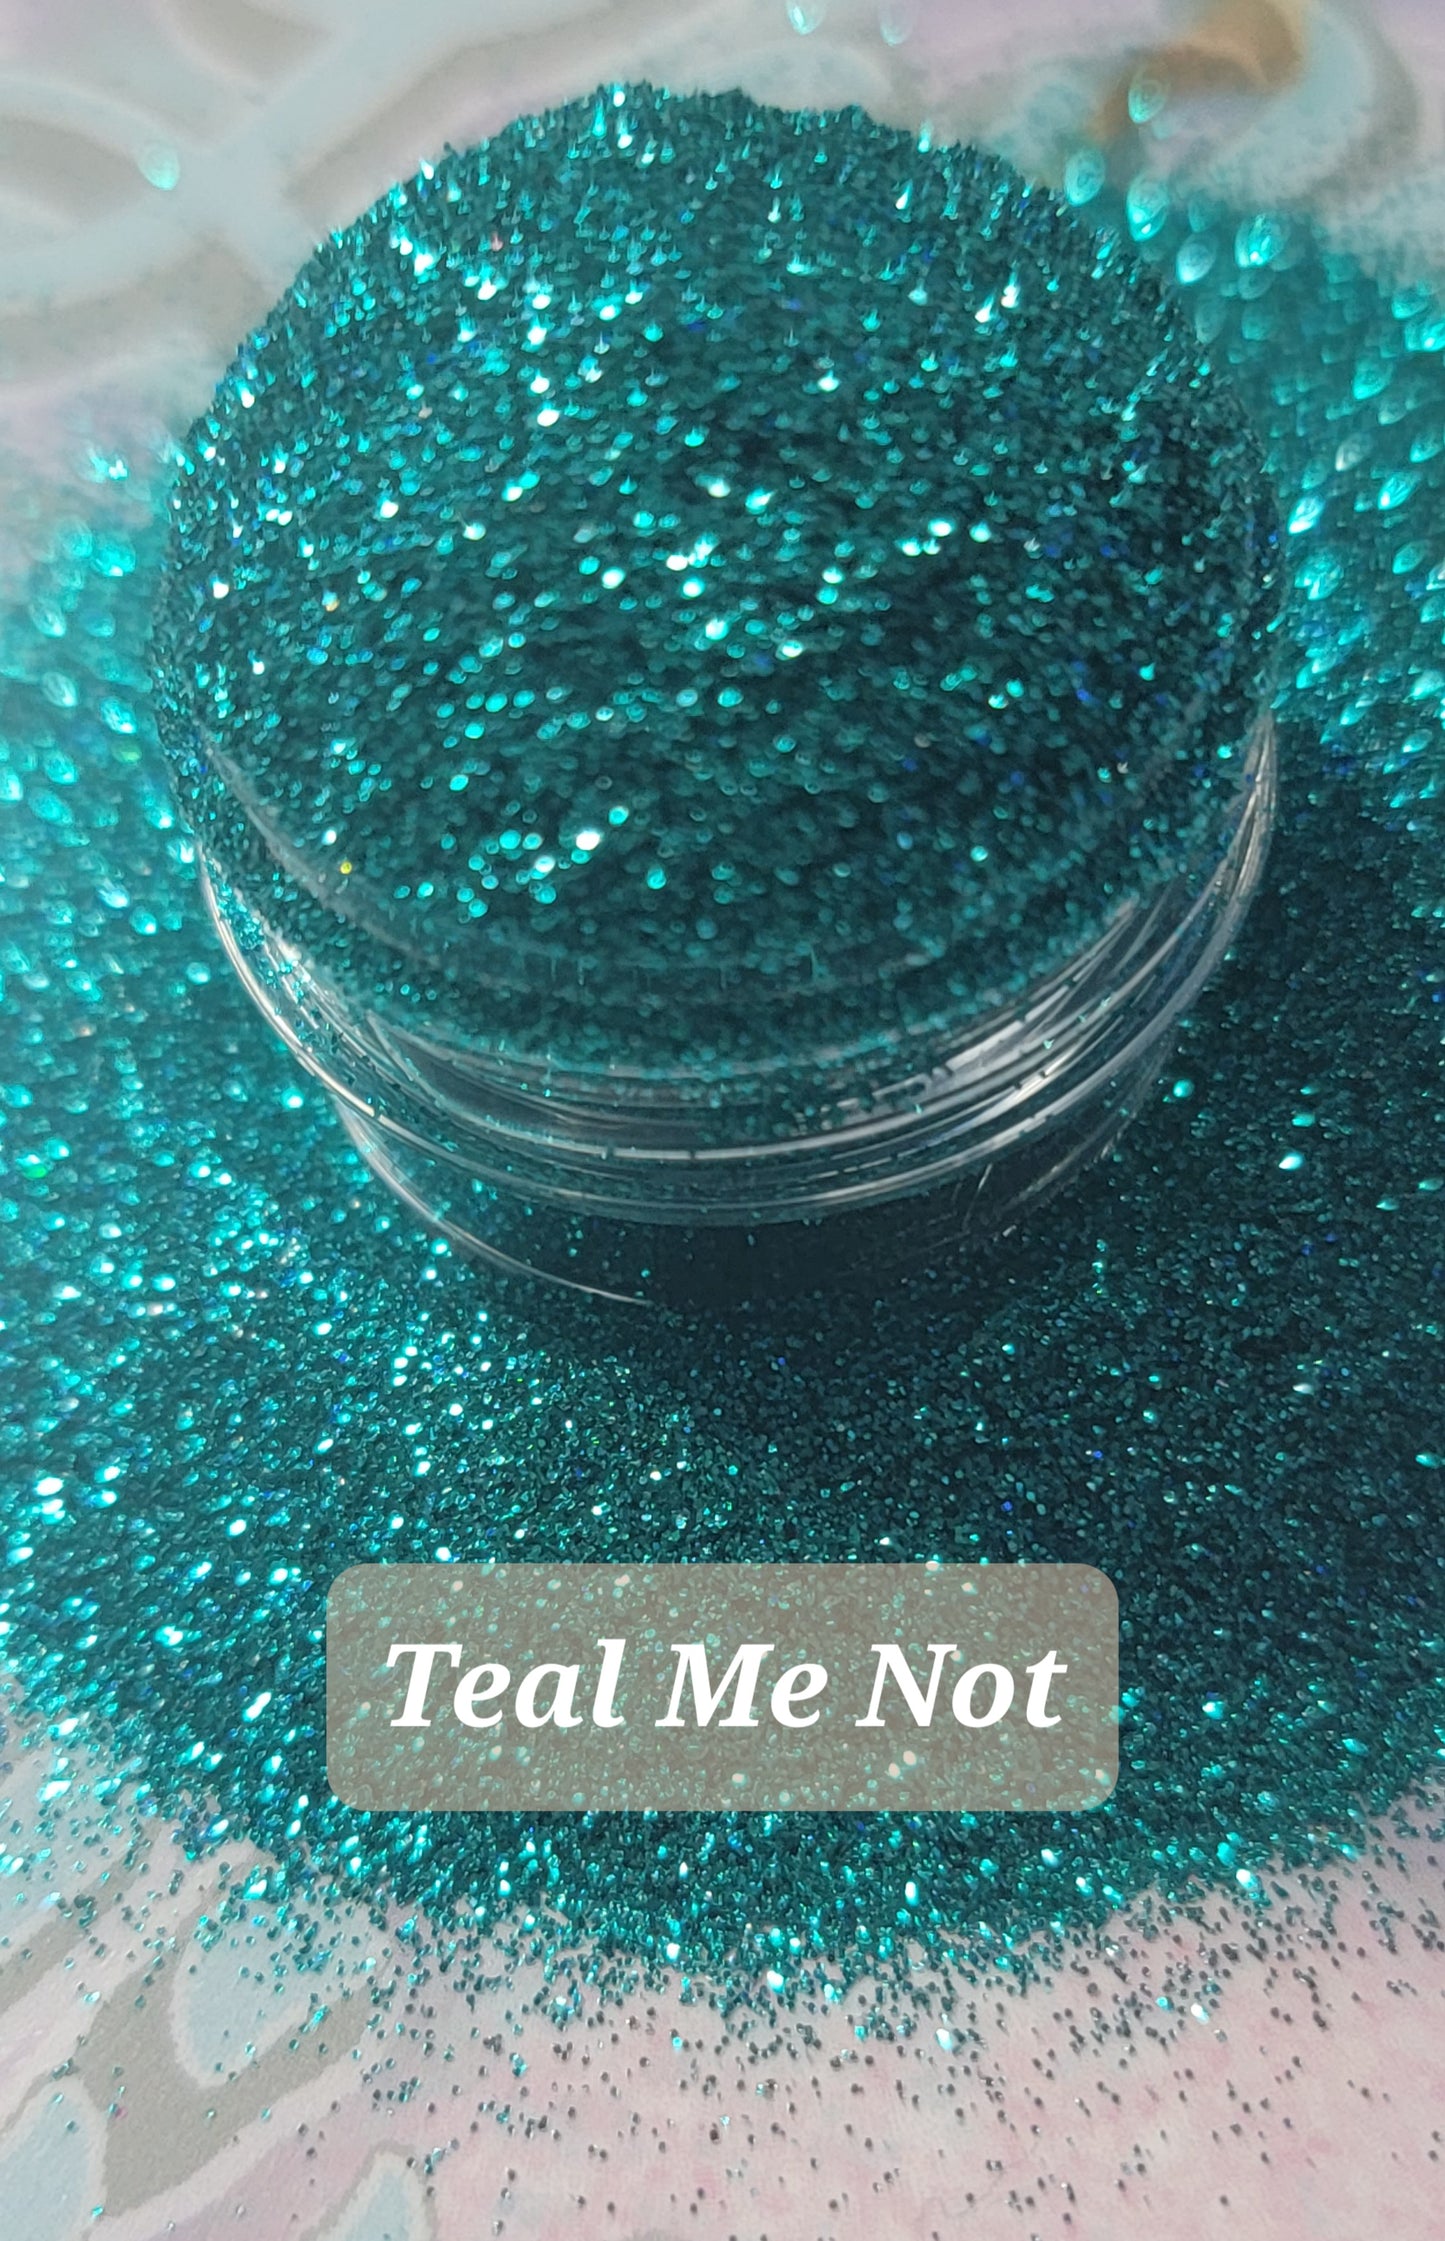 Teal Me Not